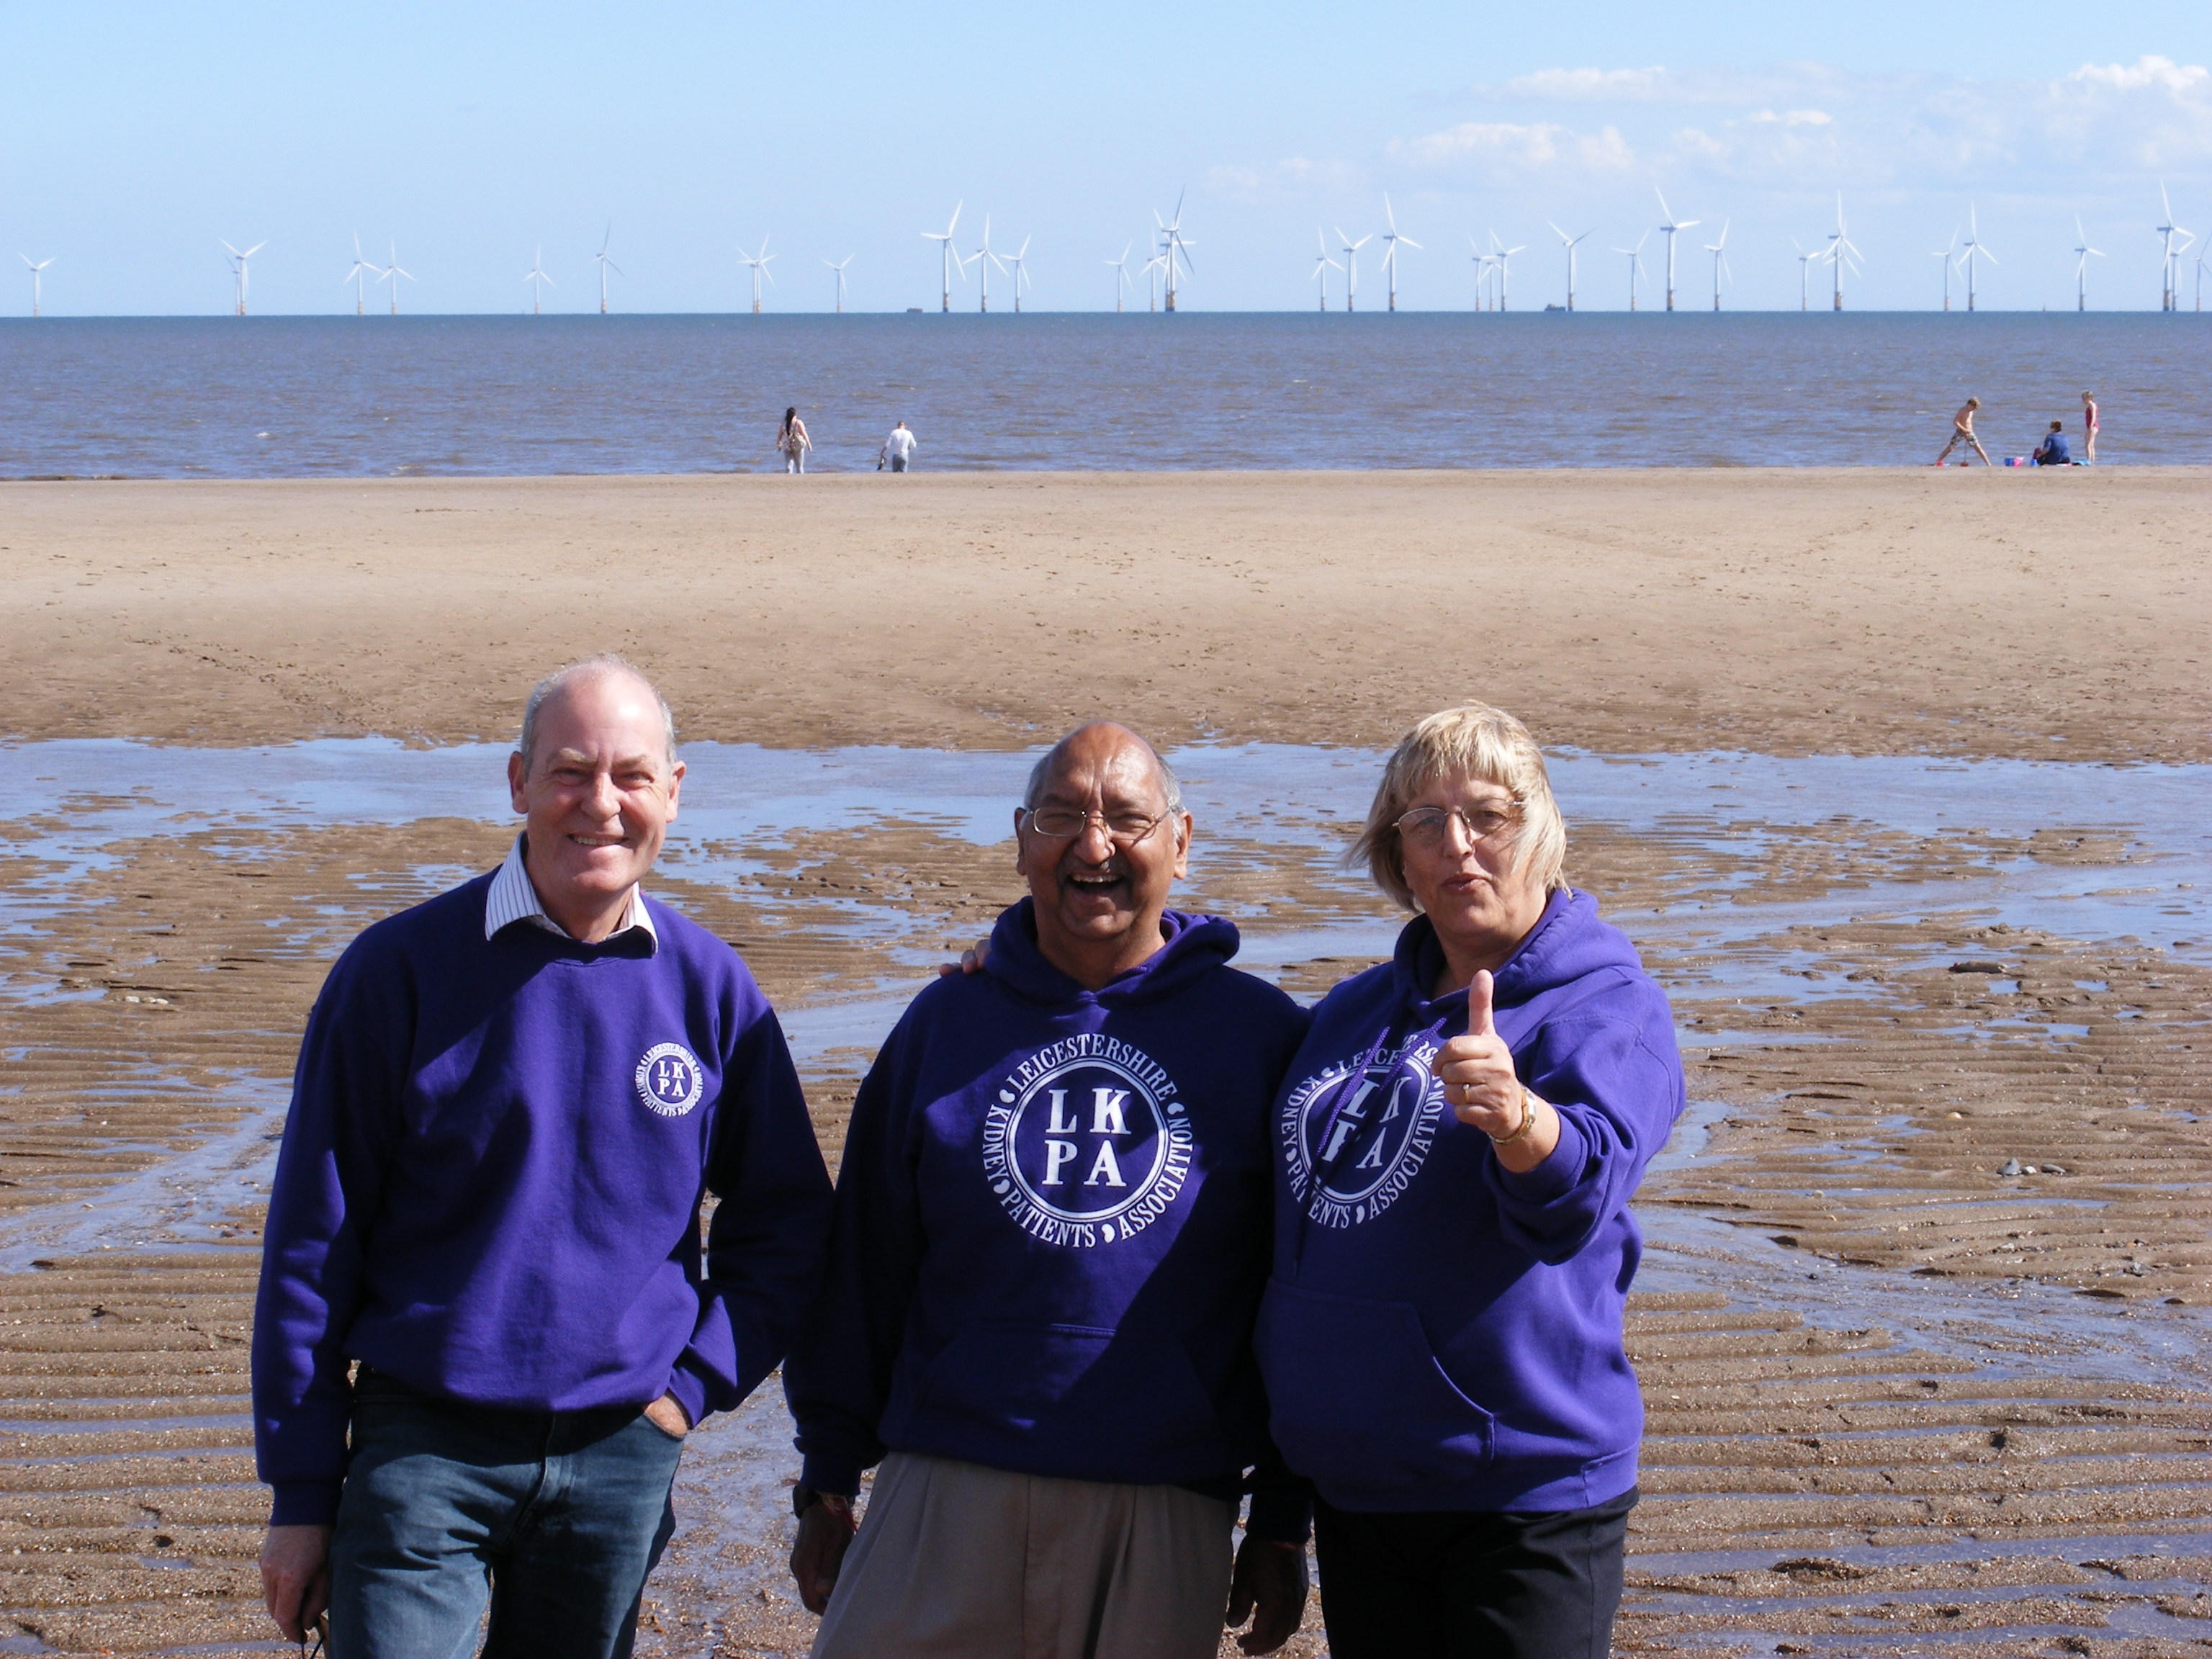 The LKPA on tour, coming to a seaside near you!